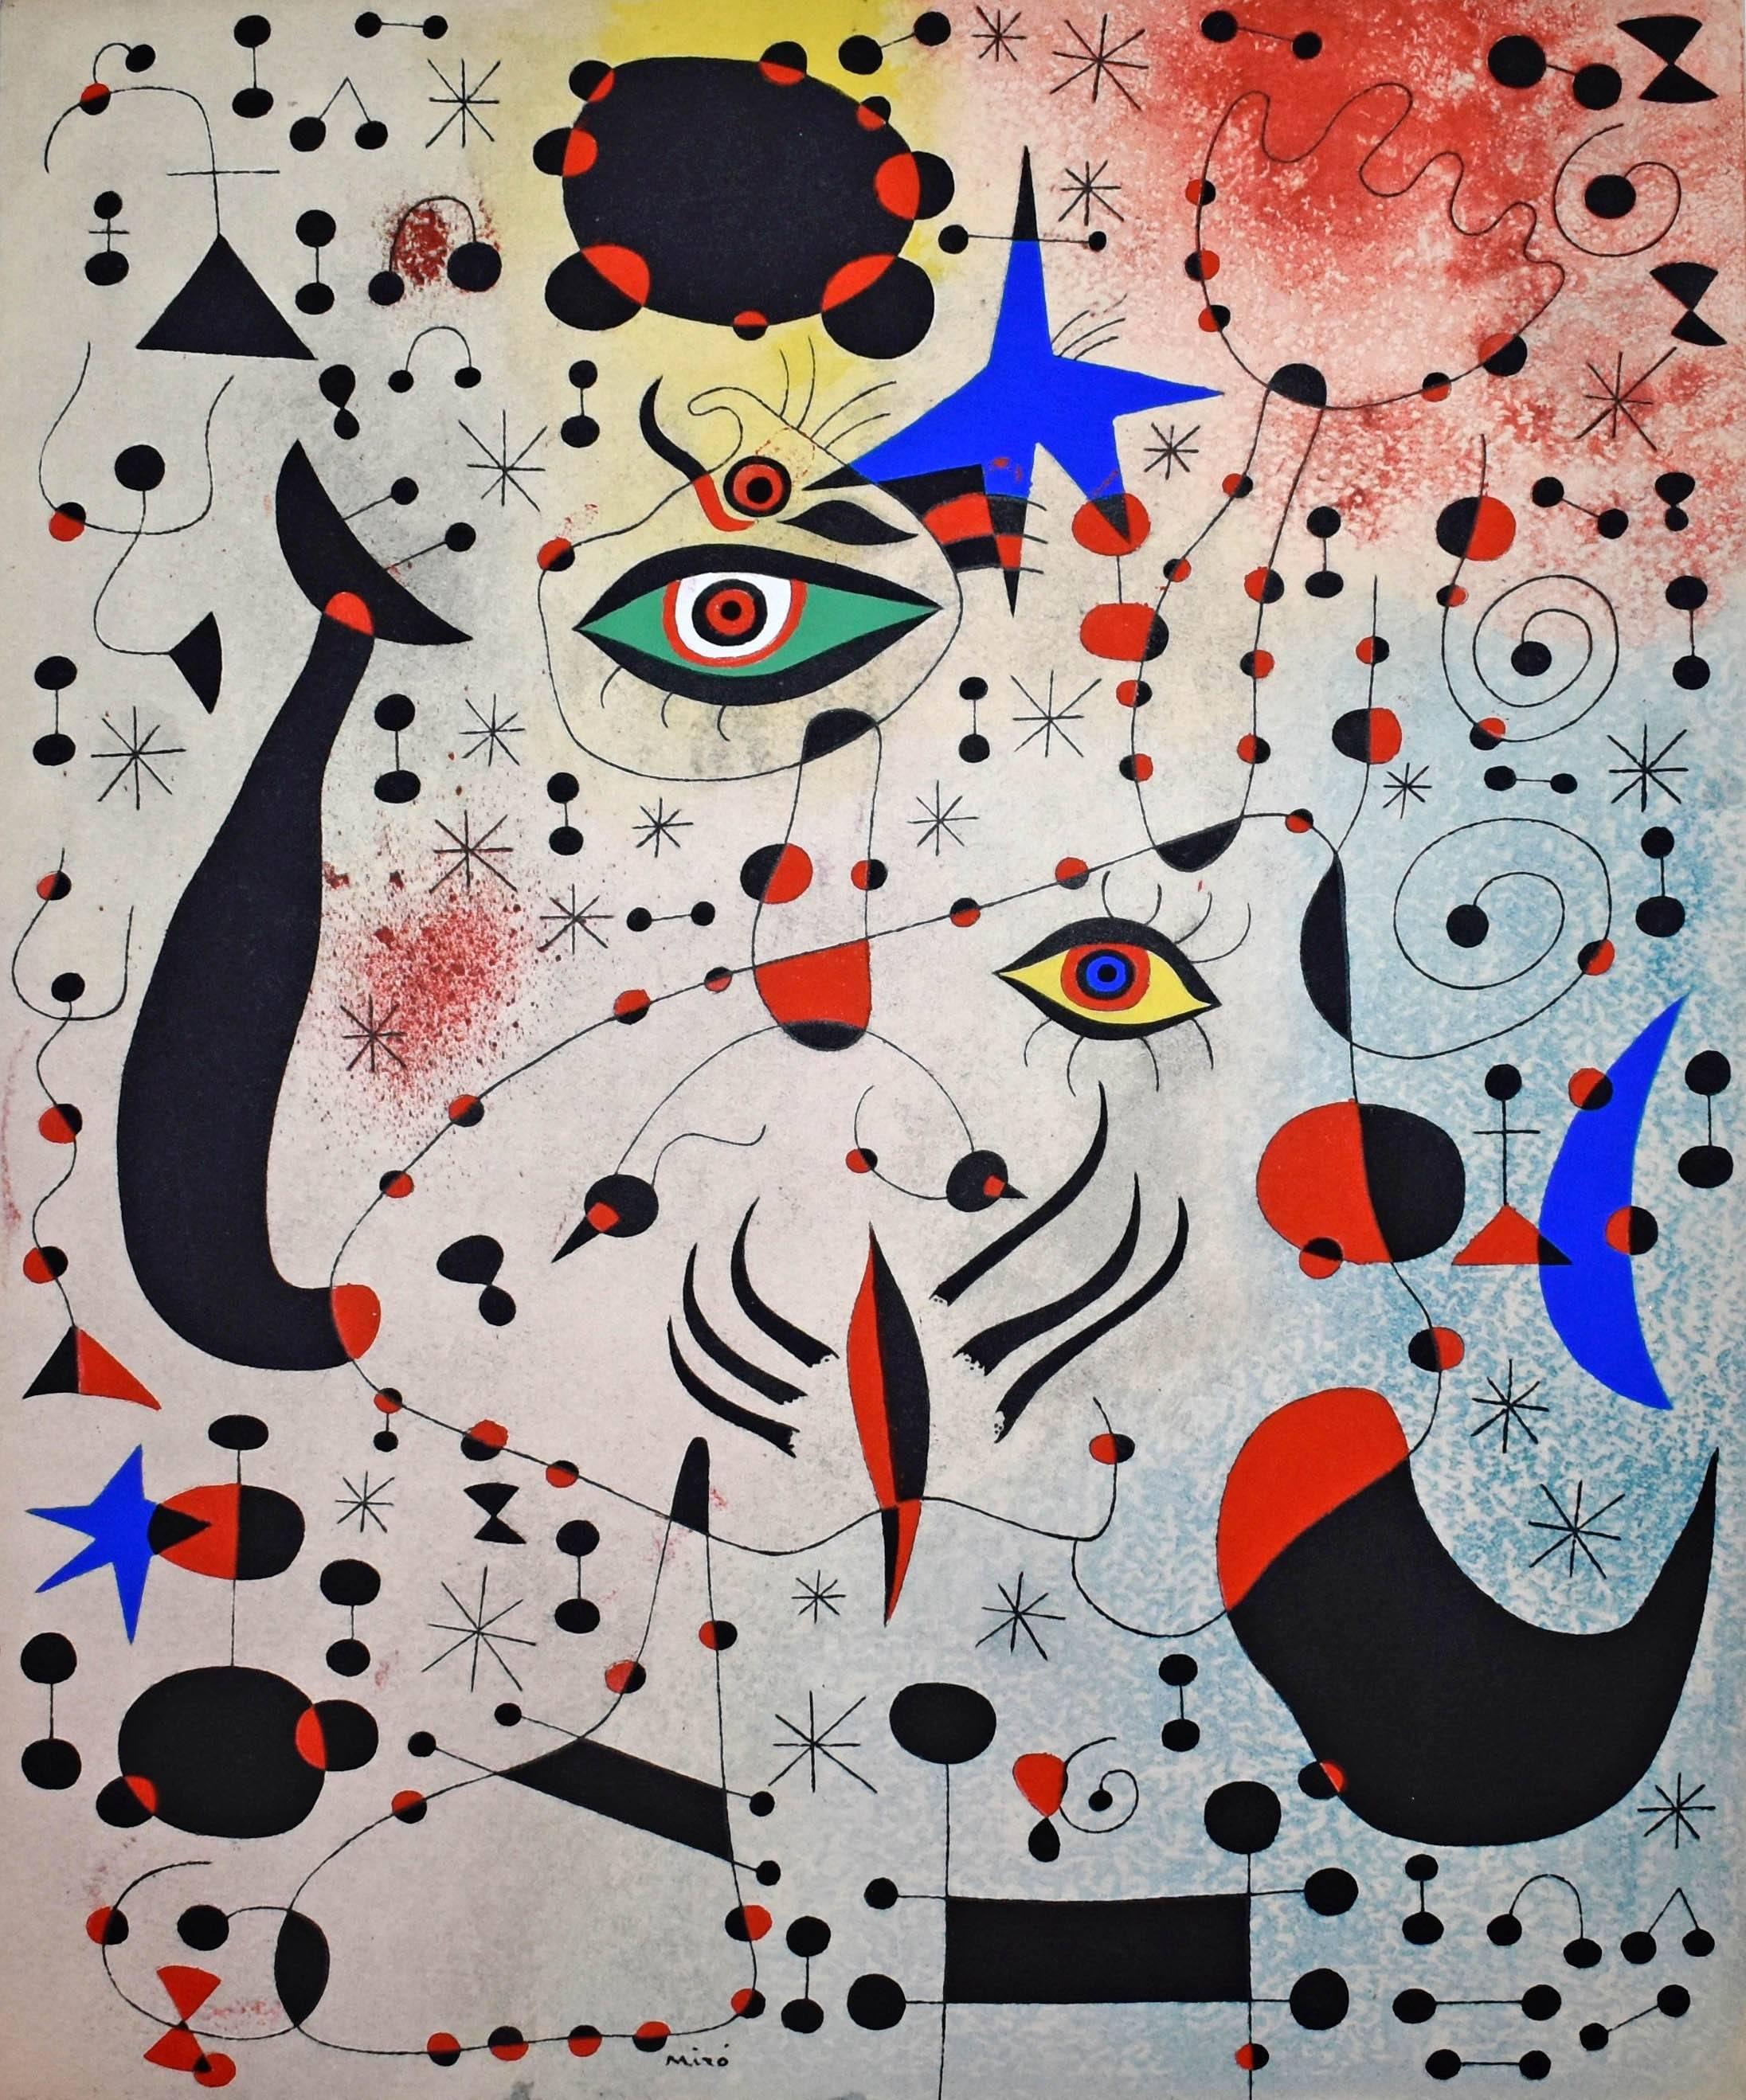 (after) Joan Miró Abstract Print - Chiffres et constellations amoureux d'une femme (Plate XIX), from Constellations